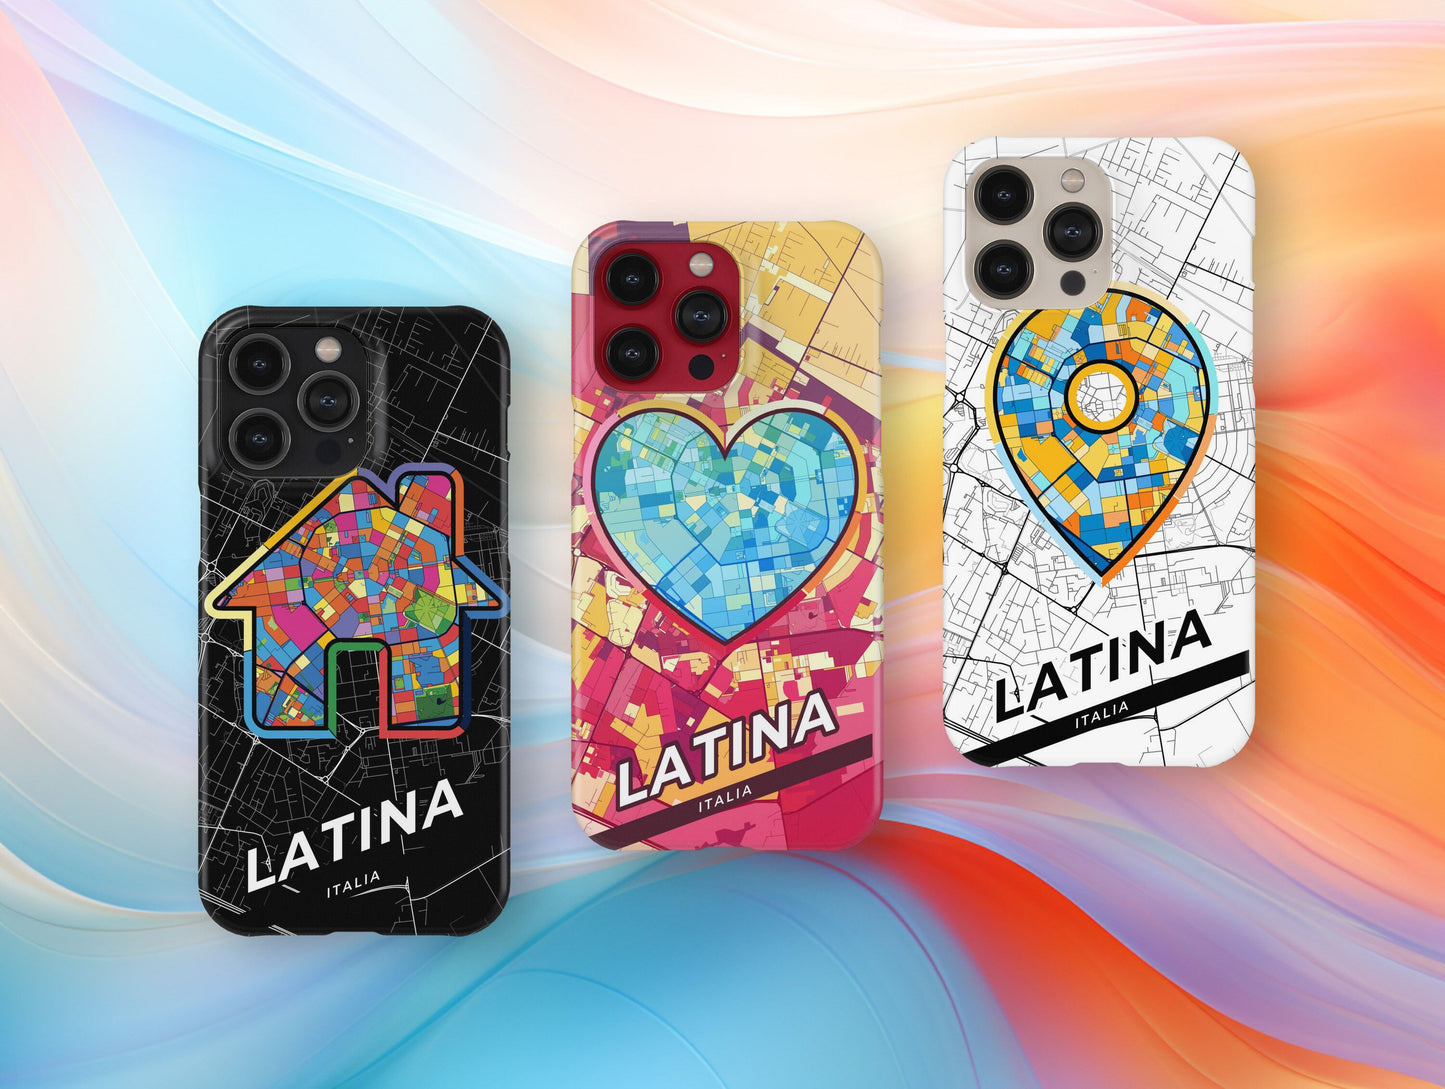 Latina Italy slim phone case with colorful icon. Birthday, wedding or housewarming gift. Couple match cases.